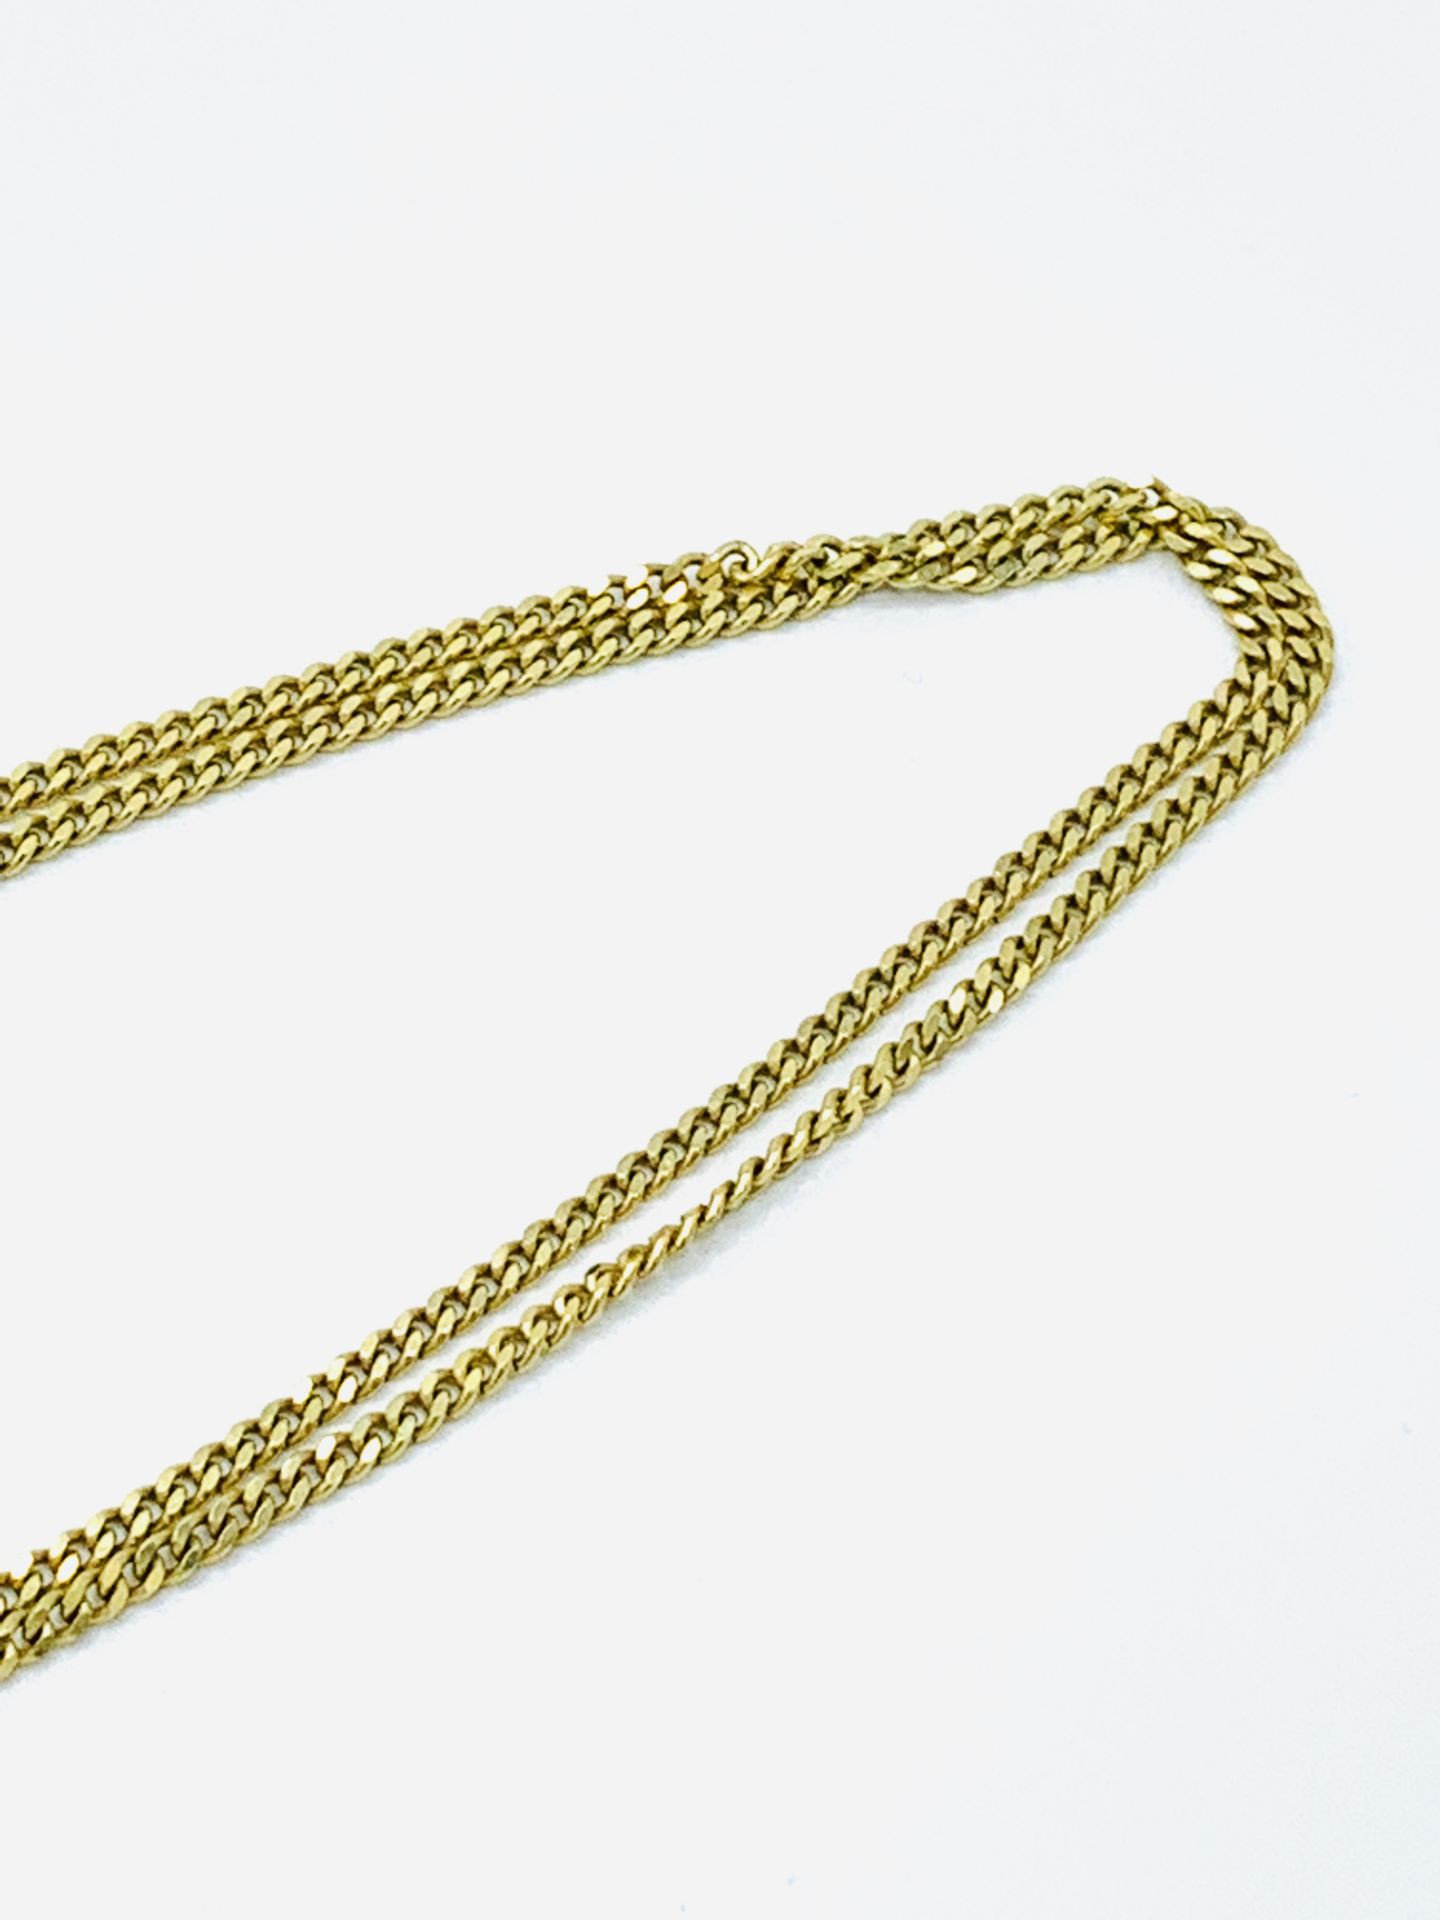 9ct gold flat chain necklace. - Image 5 of 5